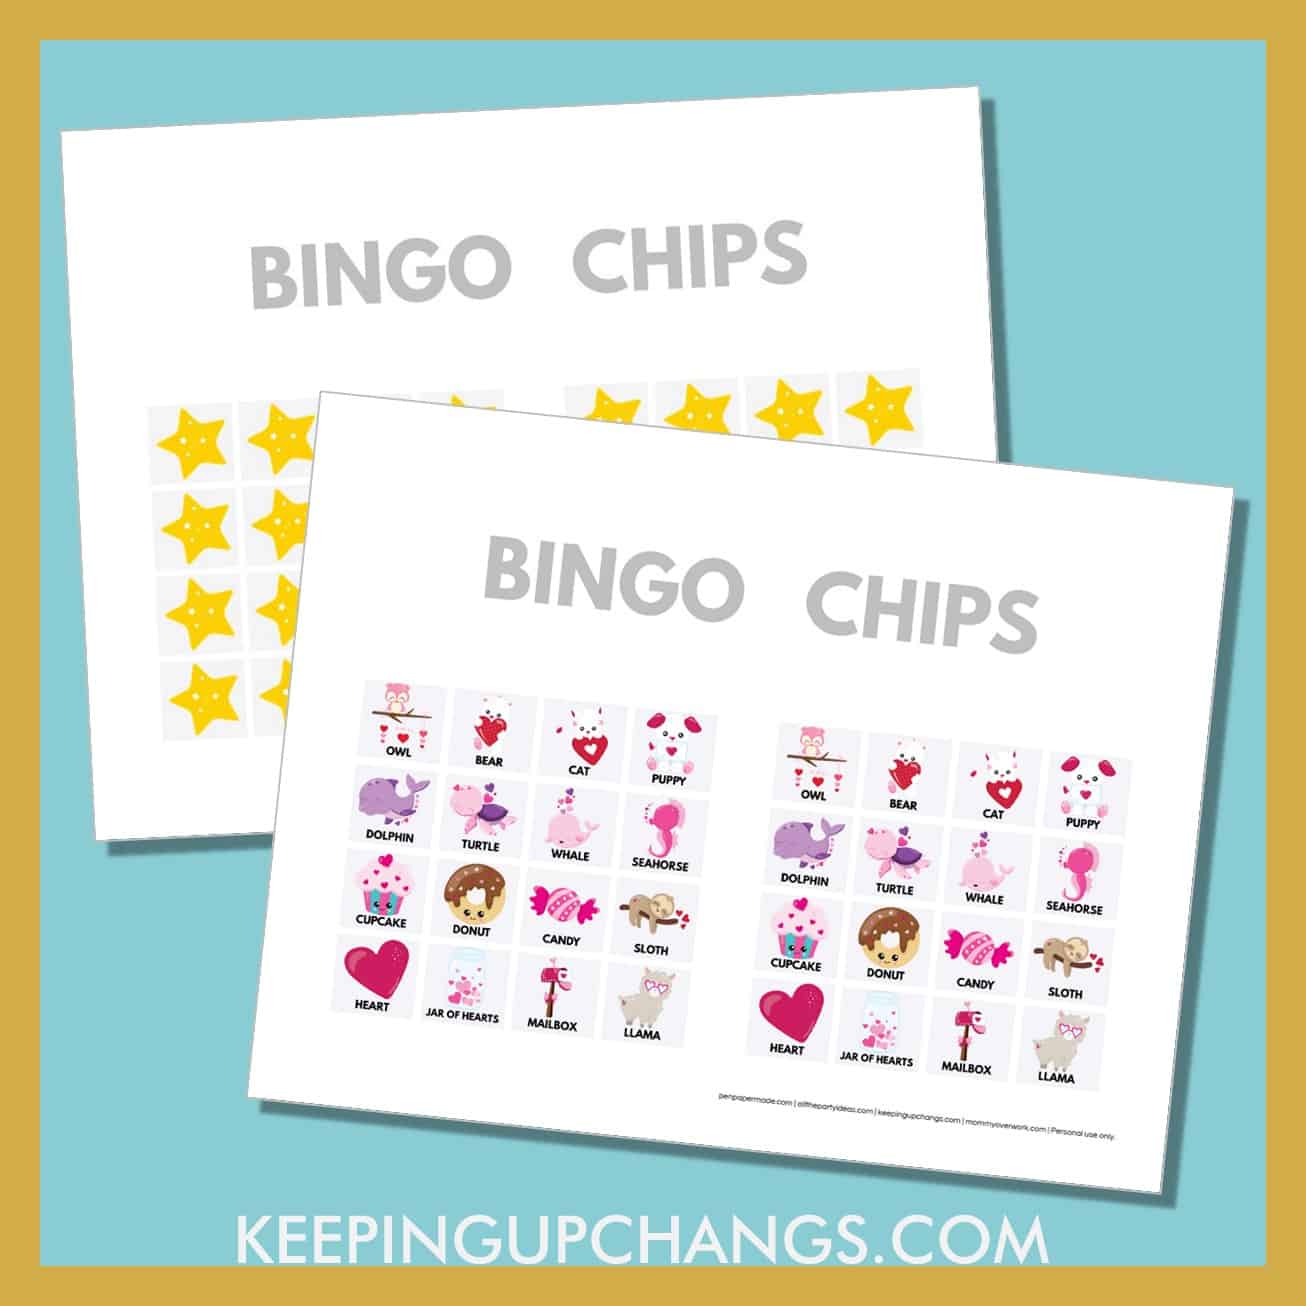 free valentine's bingo card 4x4 game chips, tokens, markers.